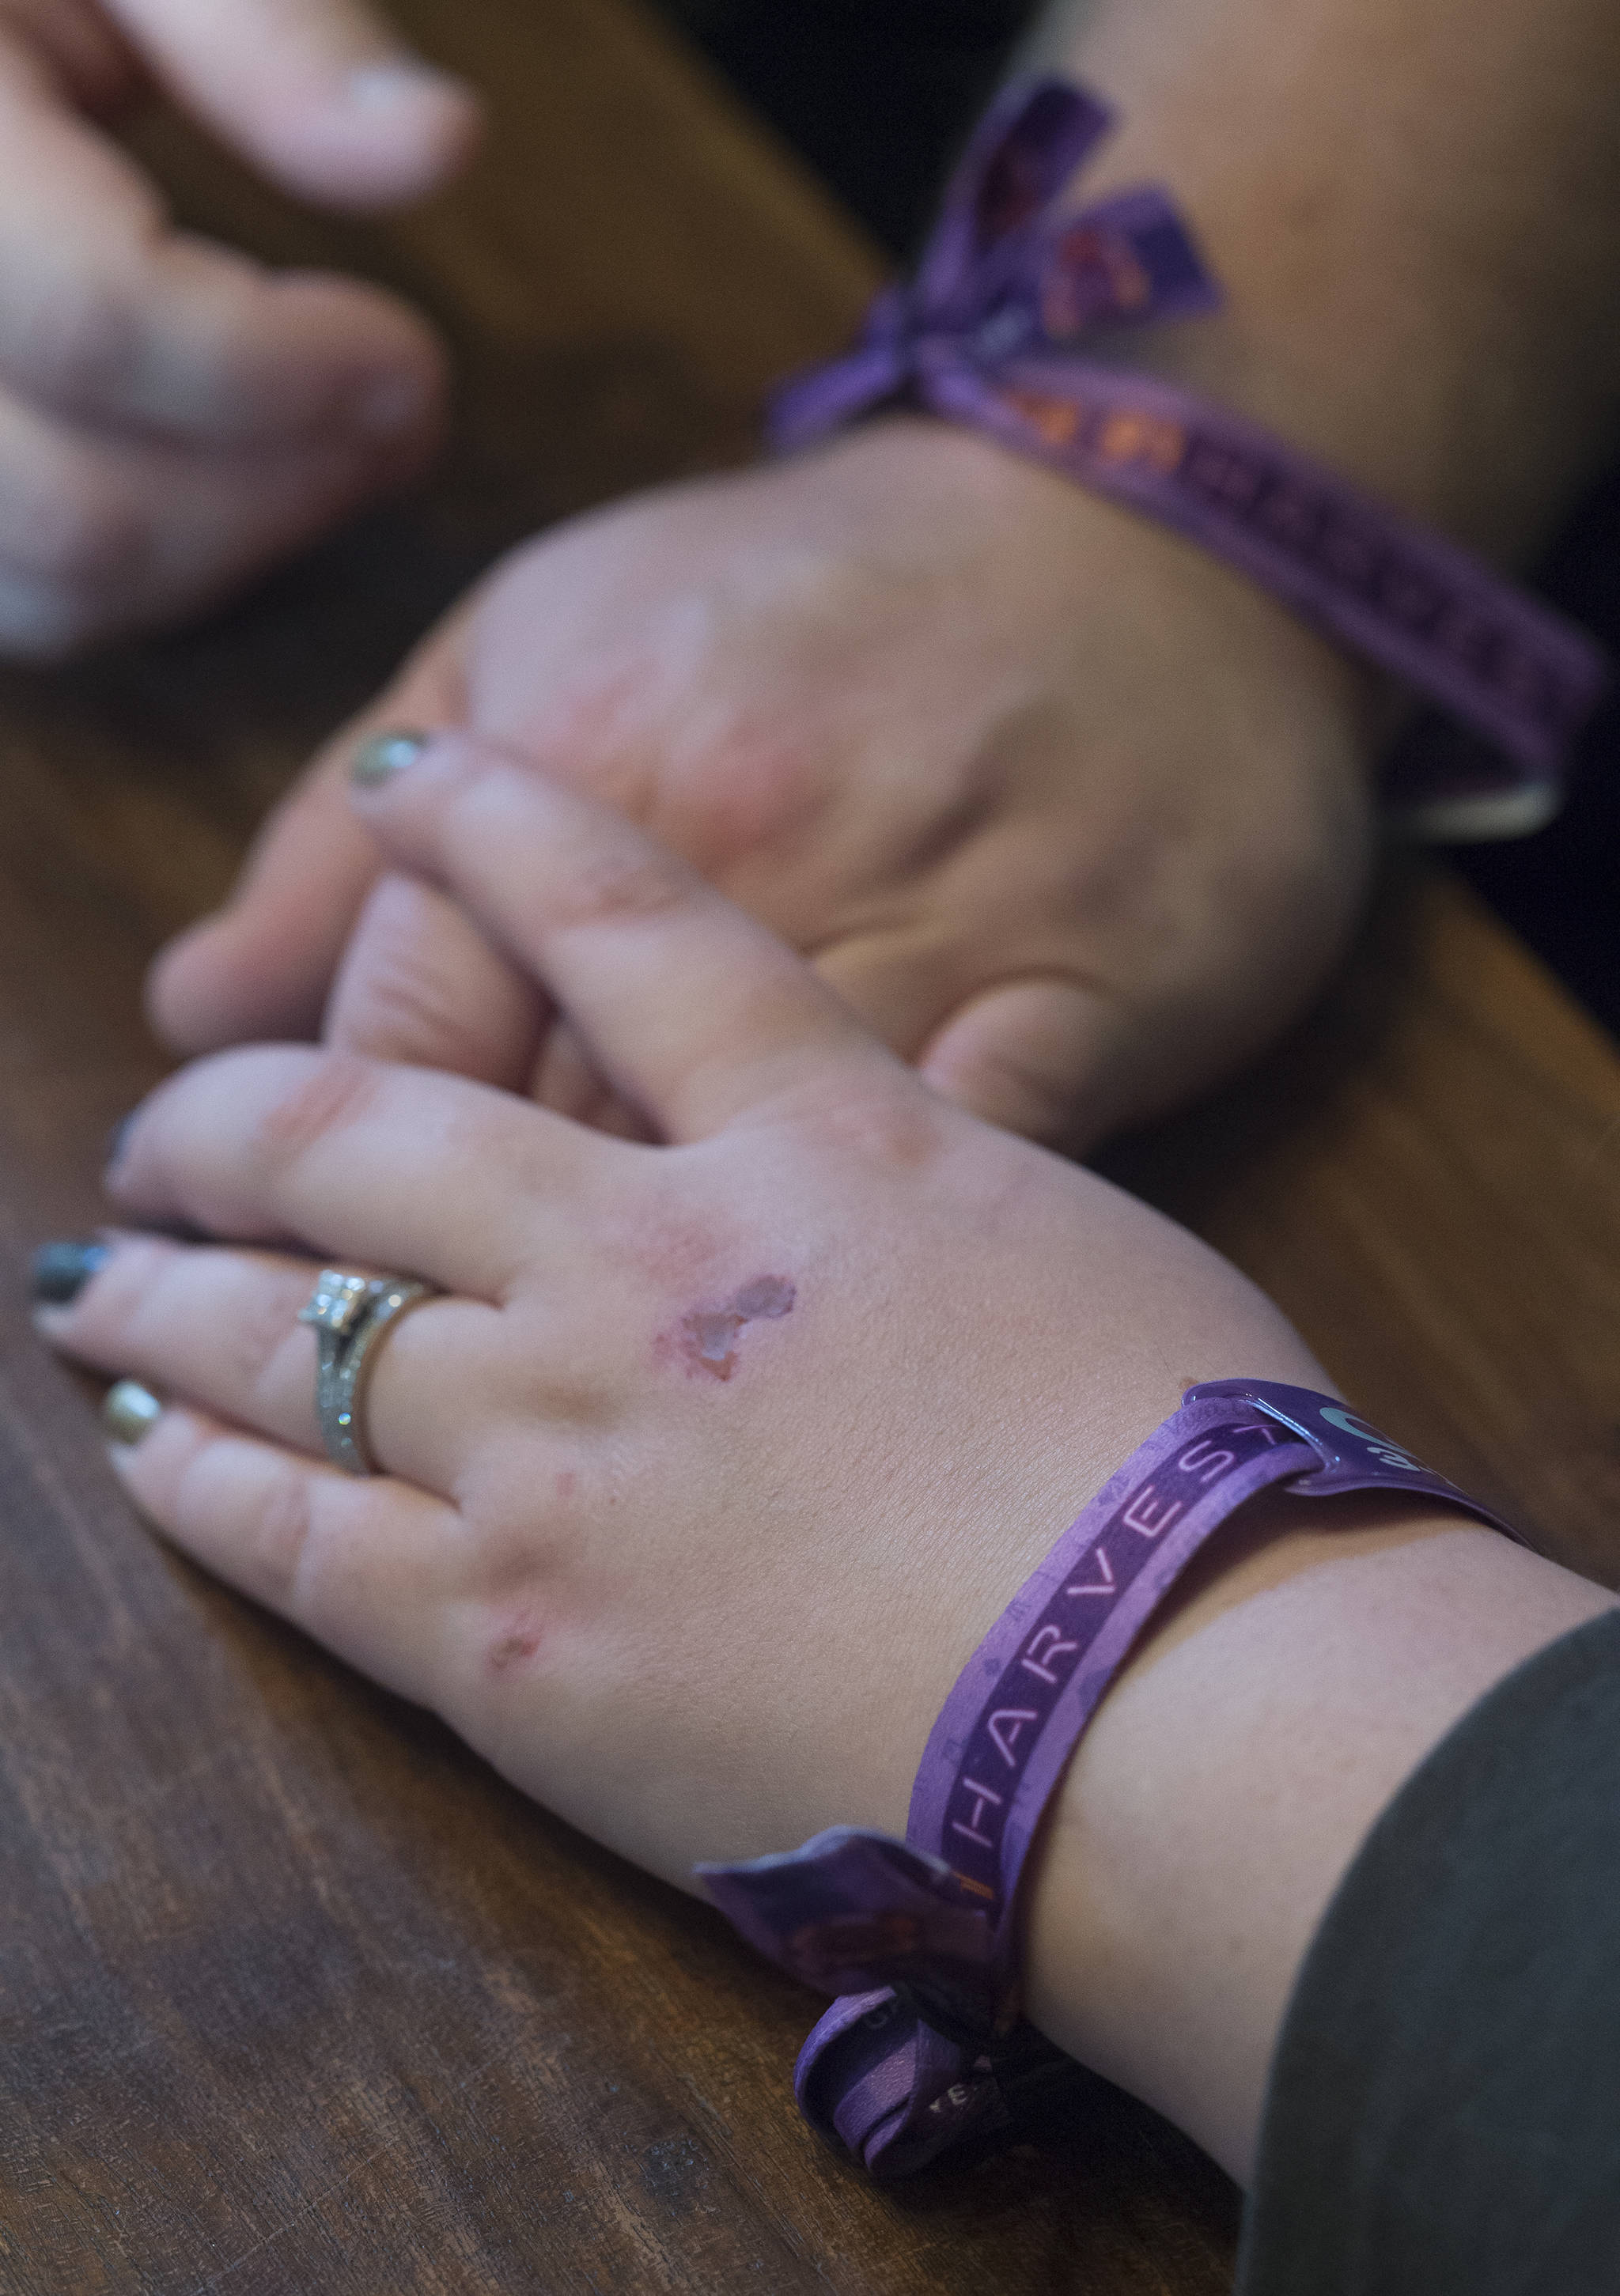 Hilary Rehfield-Green and her husband, Ryan Green, continue to wear the admission bands from the Route 91 Harvest Music Festival after returning to Juneau having survived the shooting spree over the weekend. (Michael Penn | Juneau Empire)